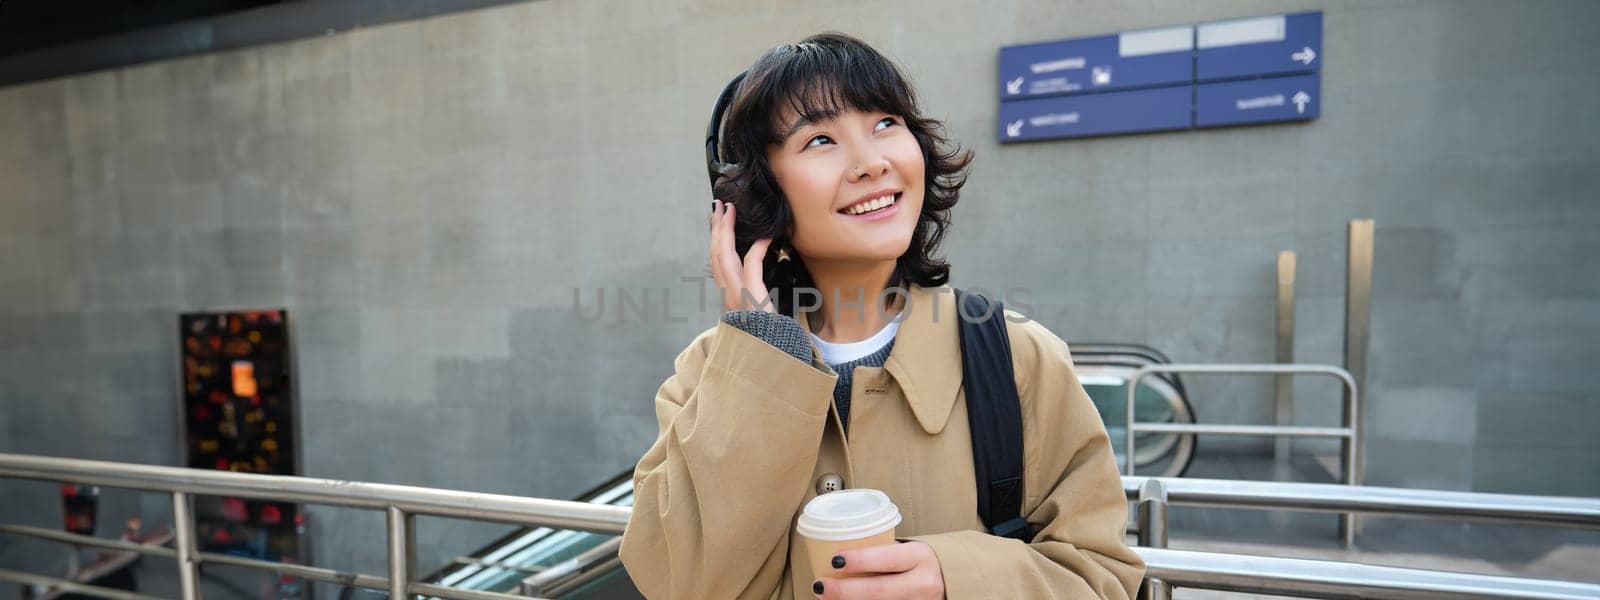 Portrait of young student, girl in headphones, drinks coffee, stands on street with backpack, commutes to university or college, smiles happily.